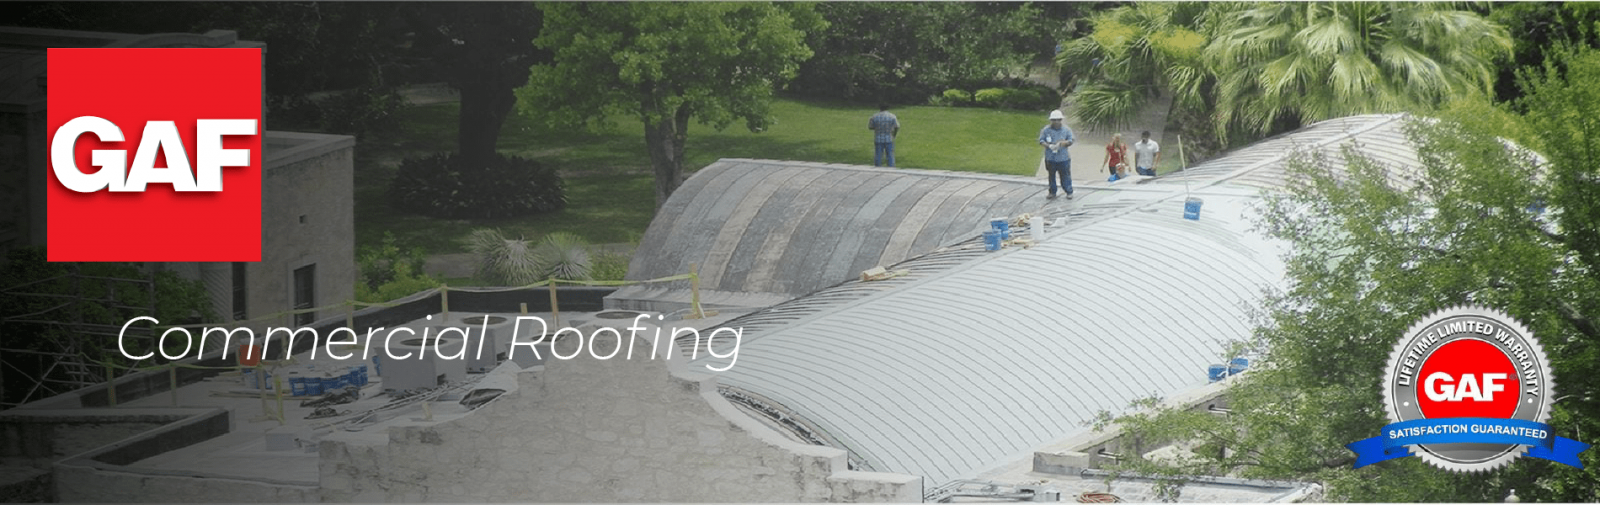 Haan Roofing and Exteriors Images